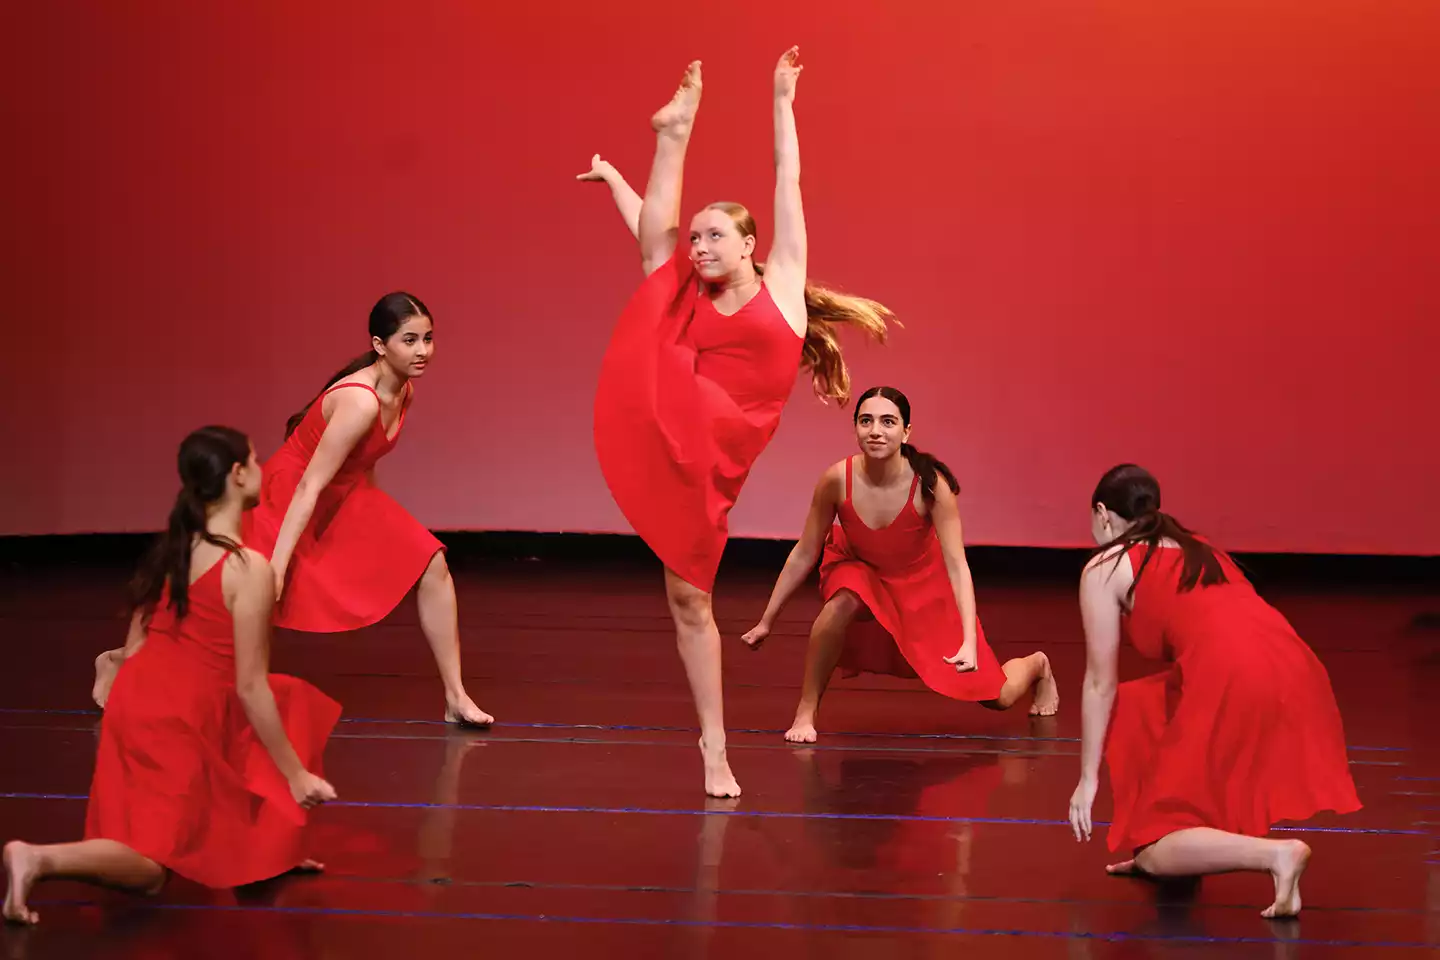 Our theater dancers weave stories through their movement.  And hey ... check out that kick!